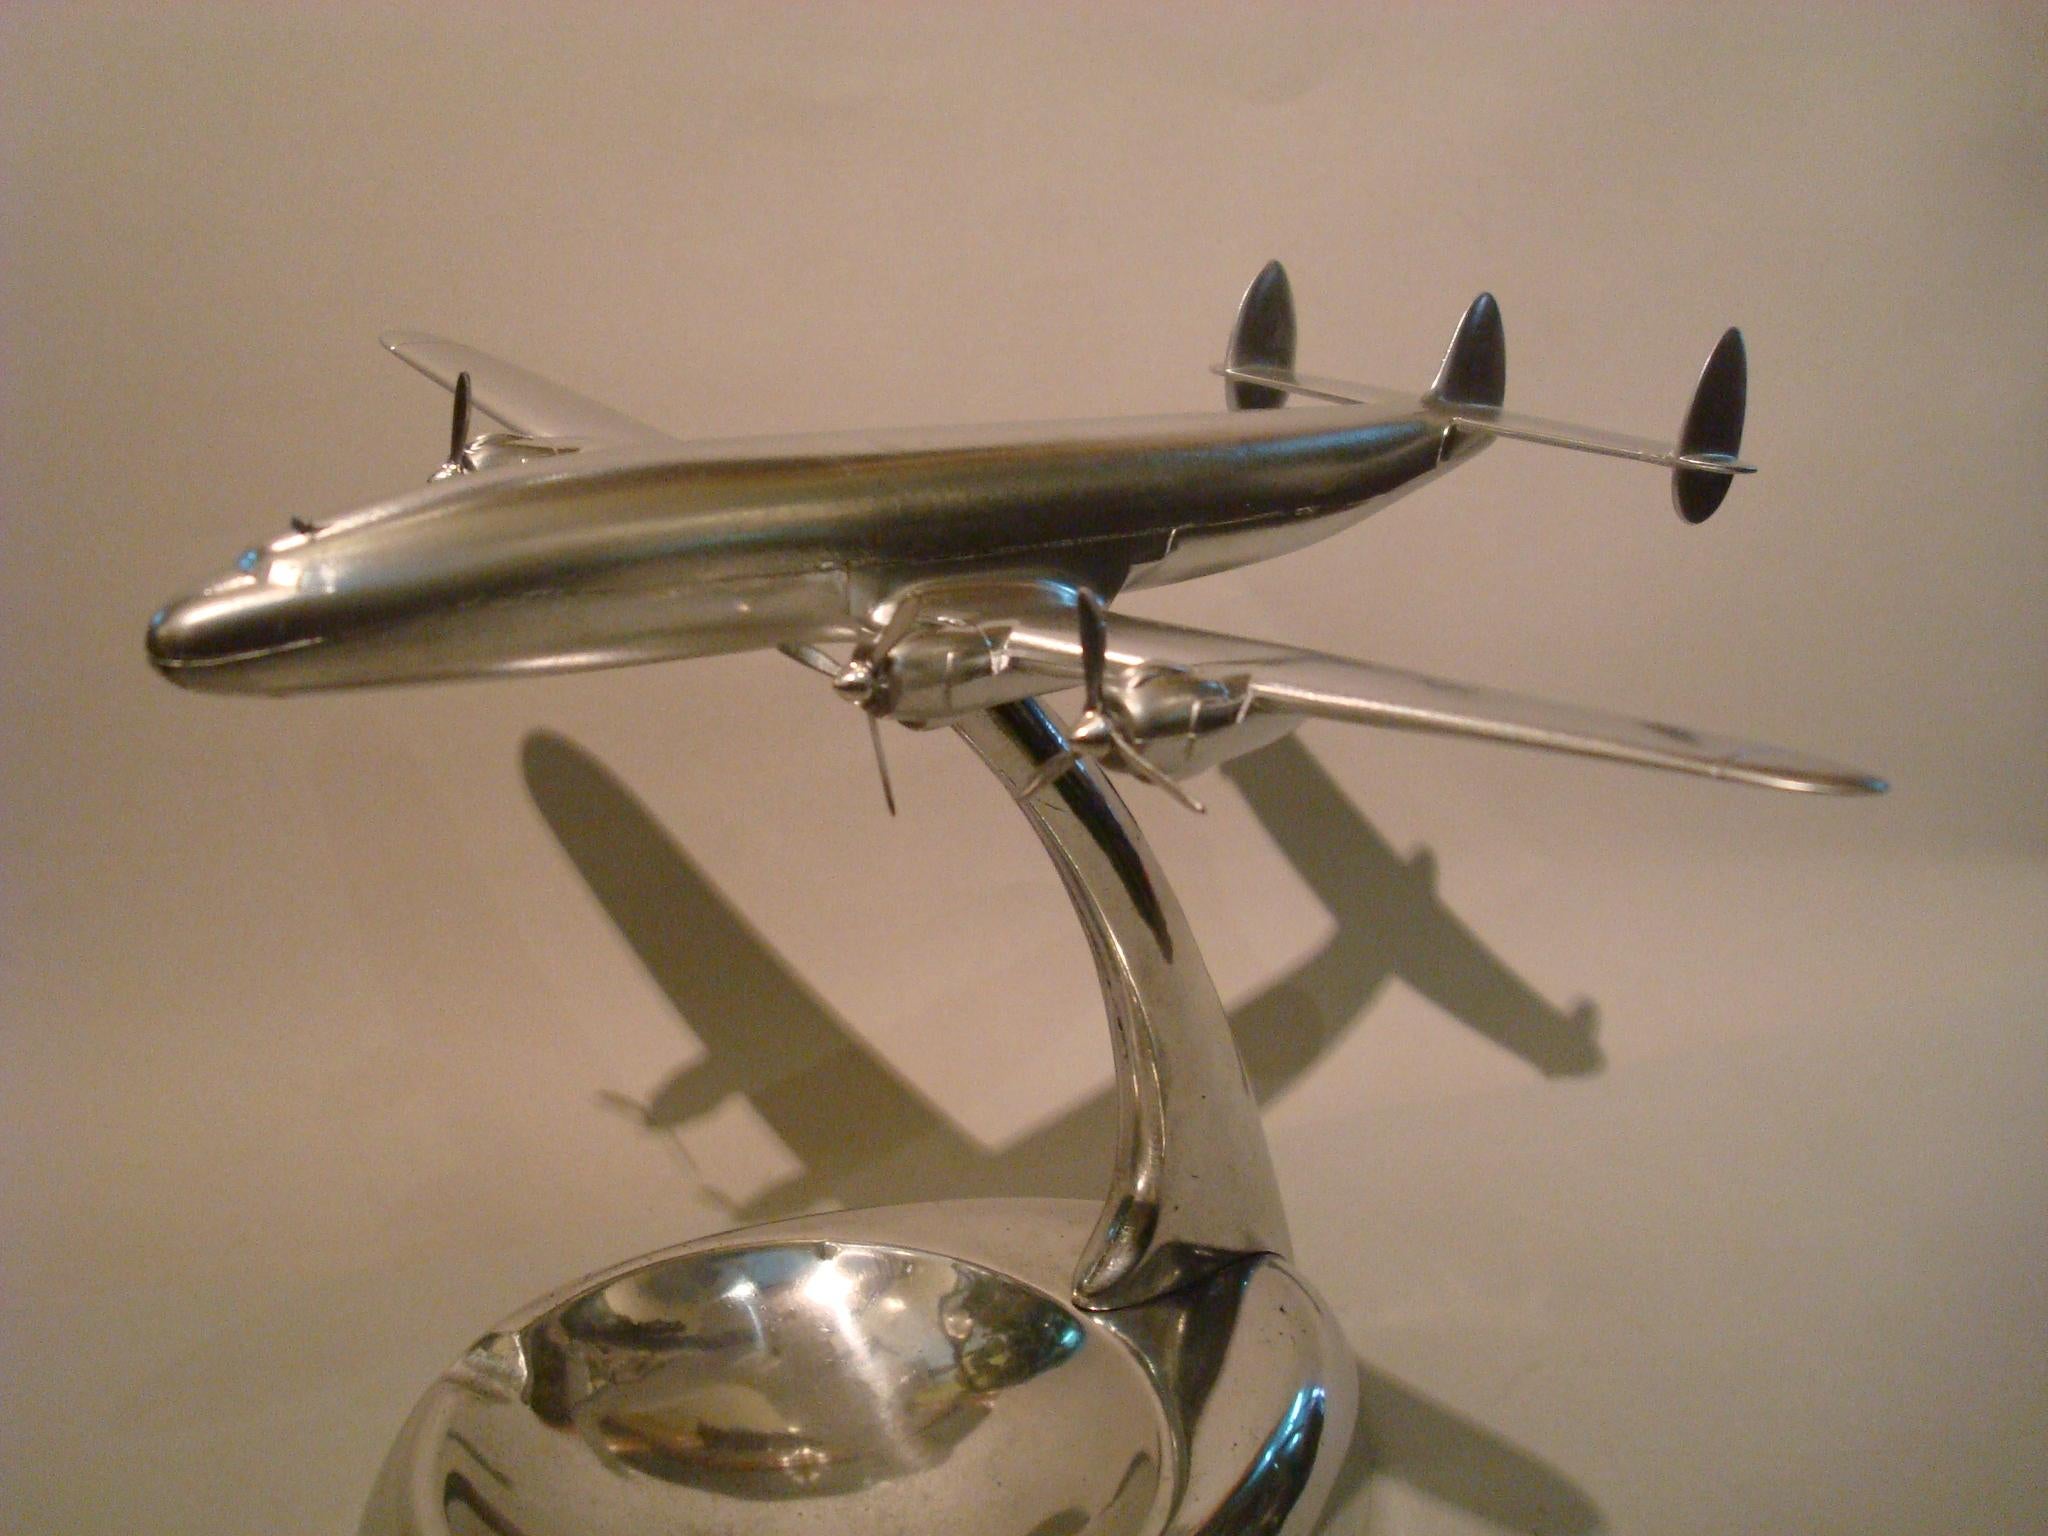 Aluminum Eastern Air Lines Constellation Airplane Desk Model Ashtray, 1950s